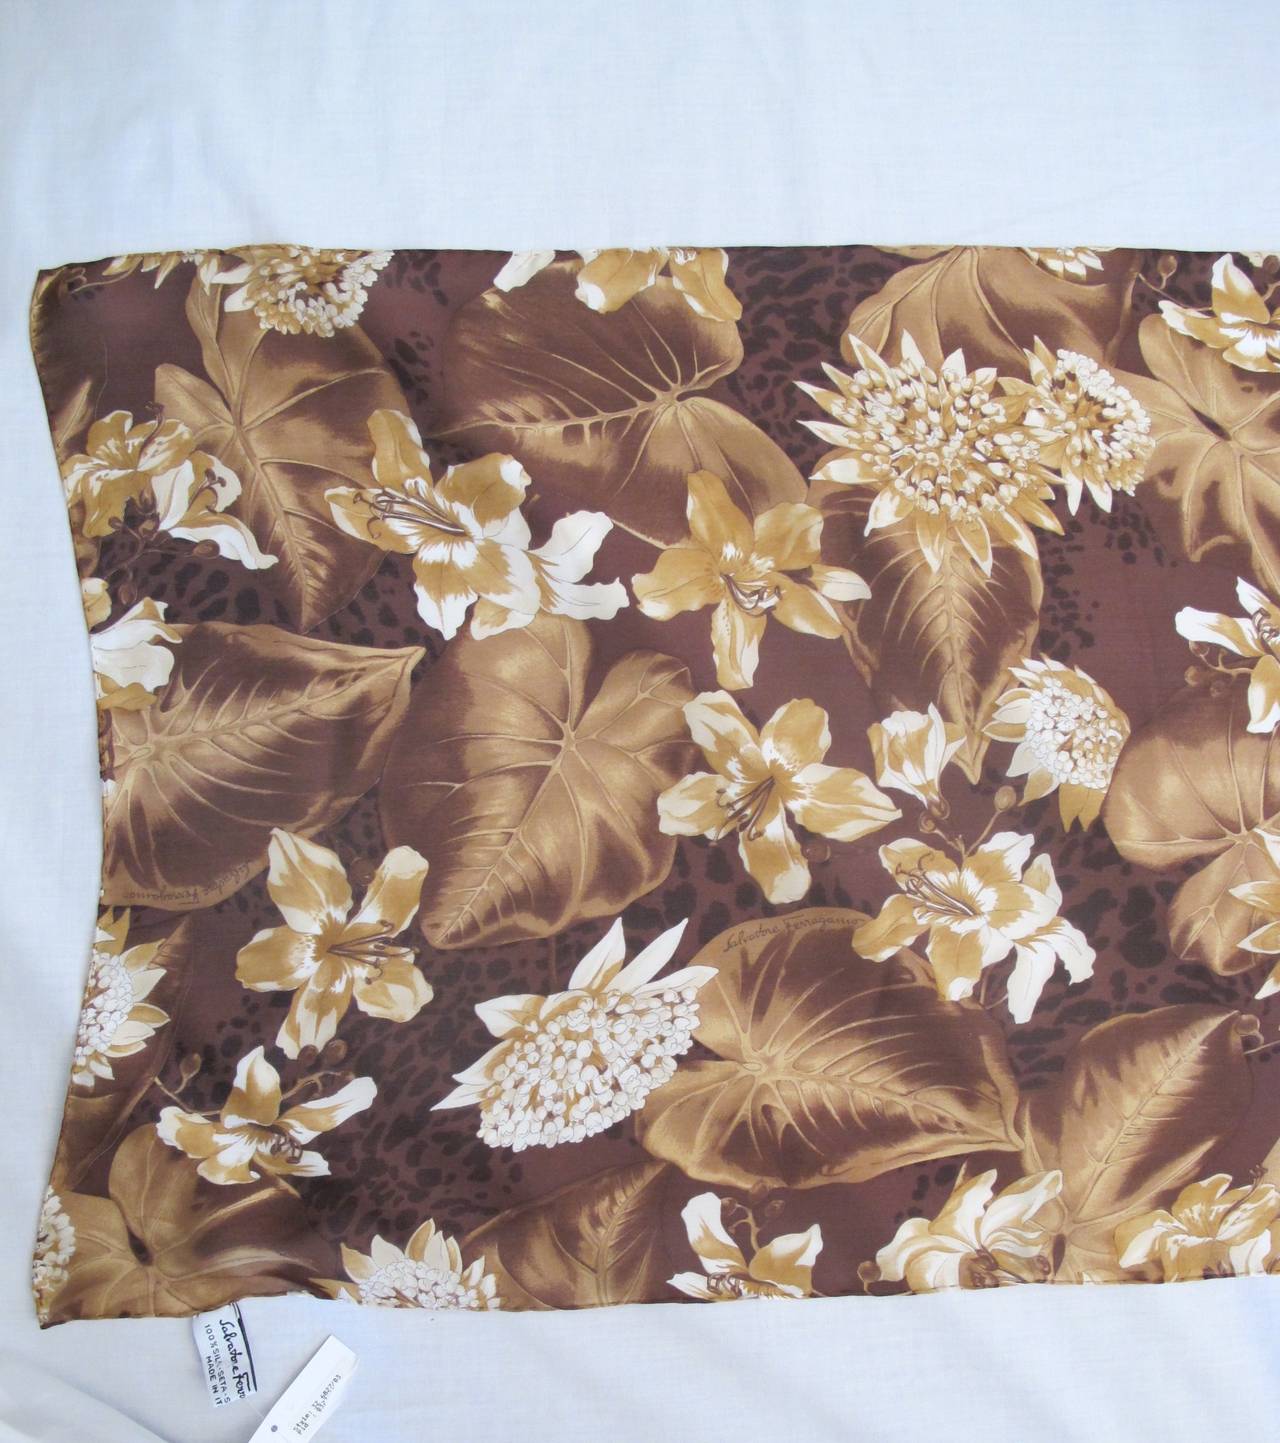 This beautiful scarf is designed with a variety of flowers and leaves with a rich brown background enhanced by different shades of mushroom browns throughout the scarf. The hem is hand-rolled.